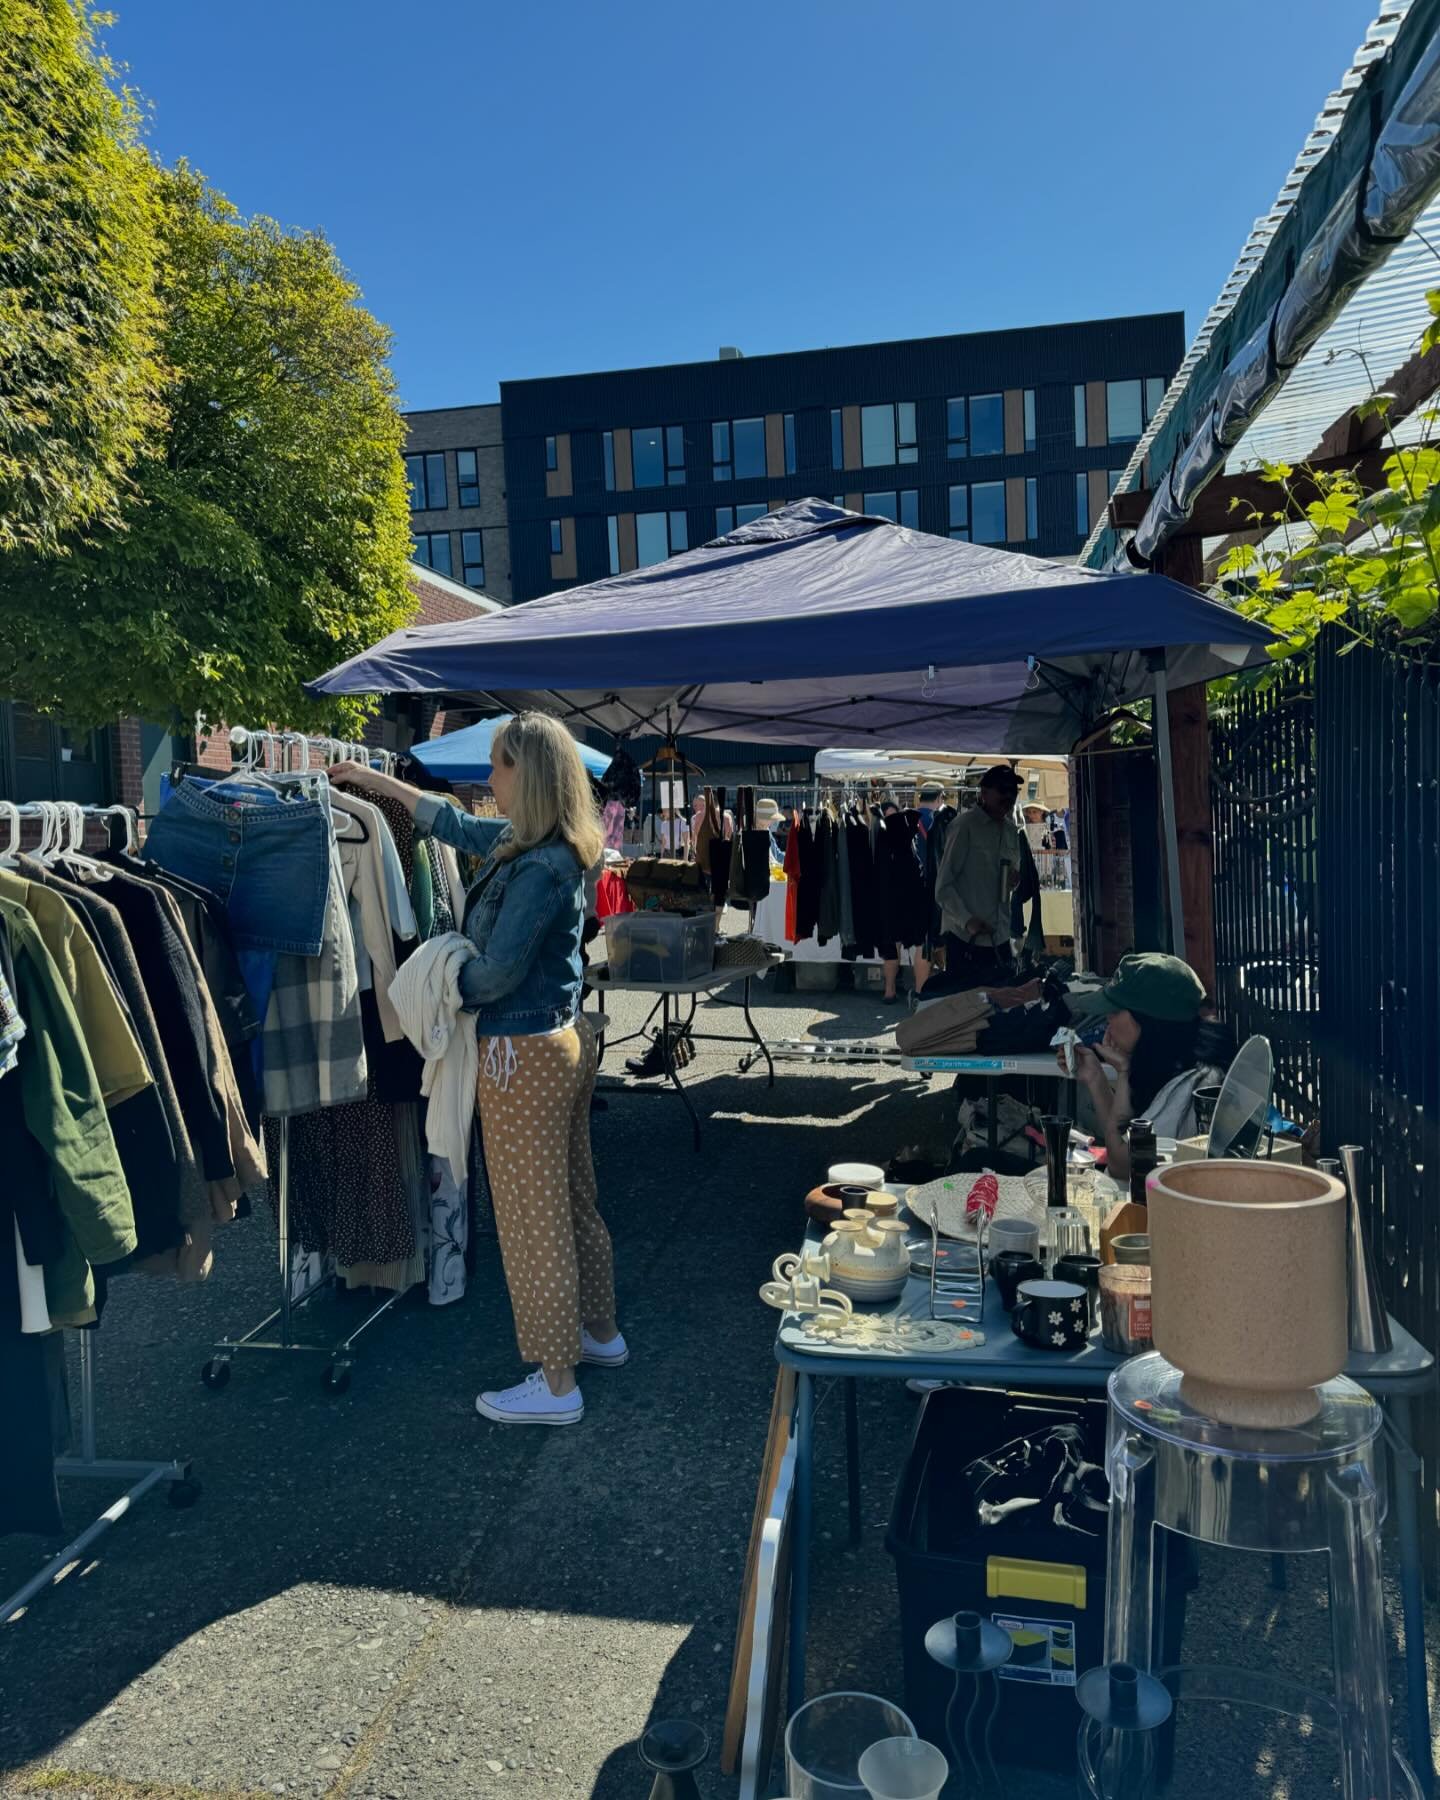 It&rsquo;s @westseattleblog&rsquo;s West Seattle Community Garage Sale Day! Hotwire is hosting lots of booths with lots of fun goodies&mdash;drop by to scoop up some deals and iced coffee! Happy Garage Sale Day!➕☕️

#hotwire #seattlecoffee #specialso